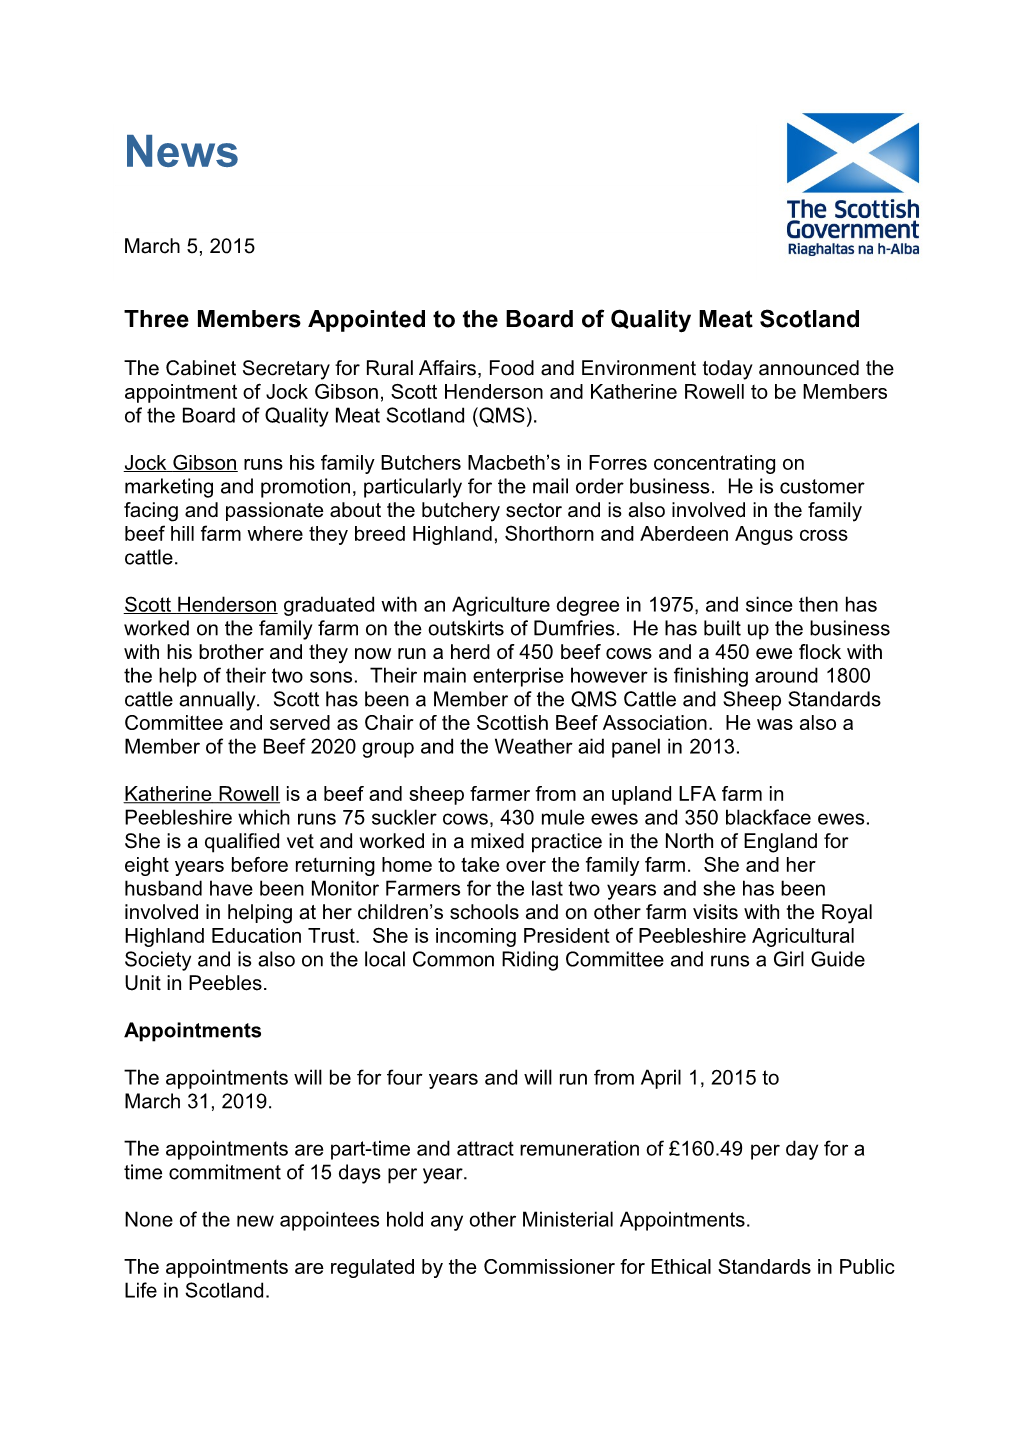 Threemembers Appointed to the Board of Quality Meat Scotland